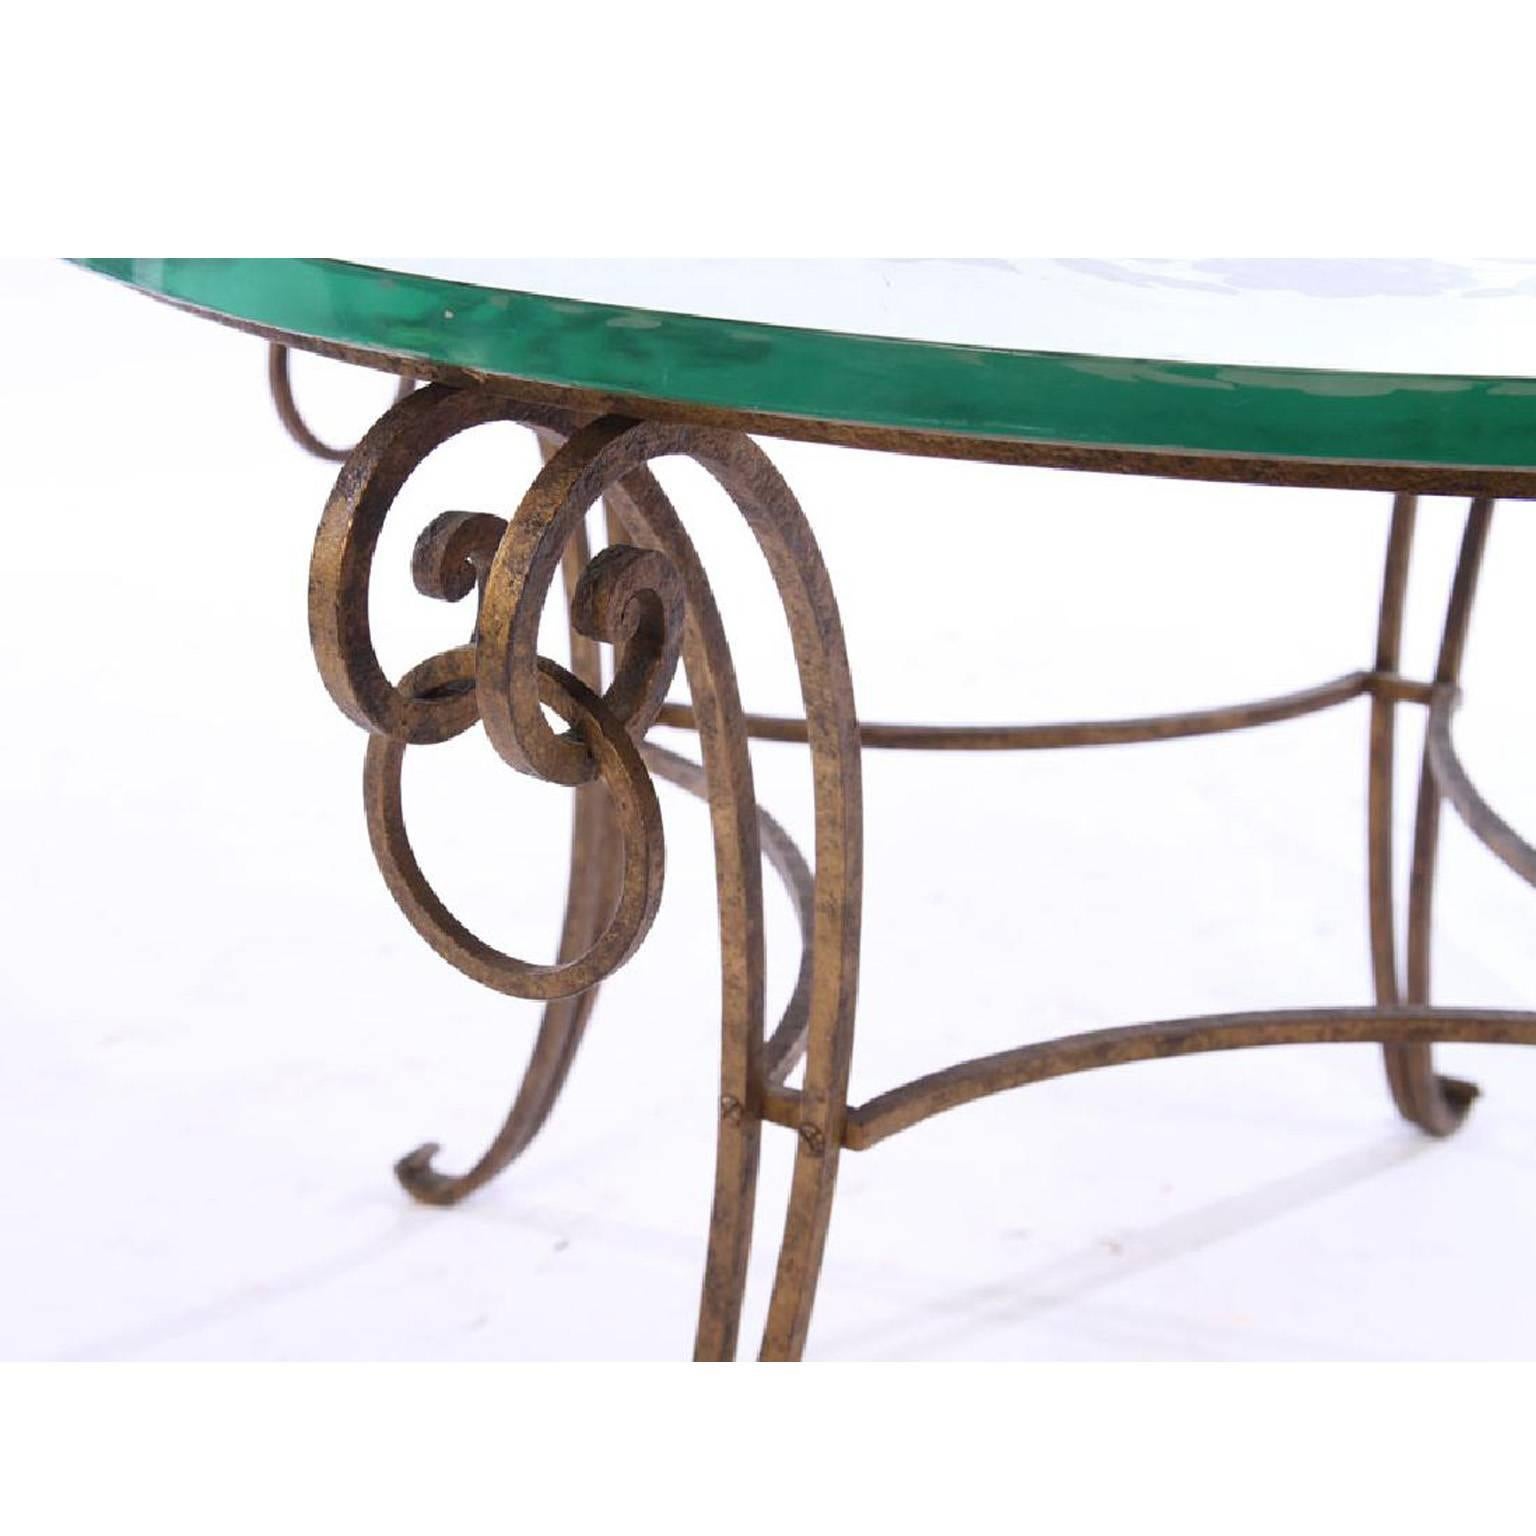 in the style of Rene Drouet mirrored French coffee table having etched floral decoration supported on wrought iron base. Mirrored top is 1 inch thick.

Architect, Sandy Littman of Duesenberg LTD.  and The American Glass Light Company have been